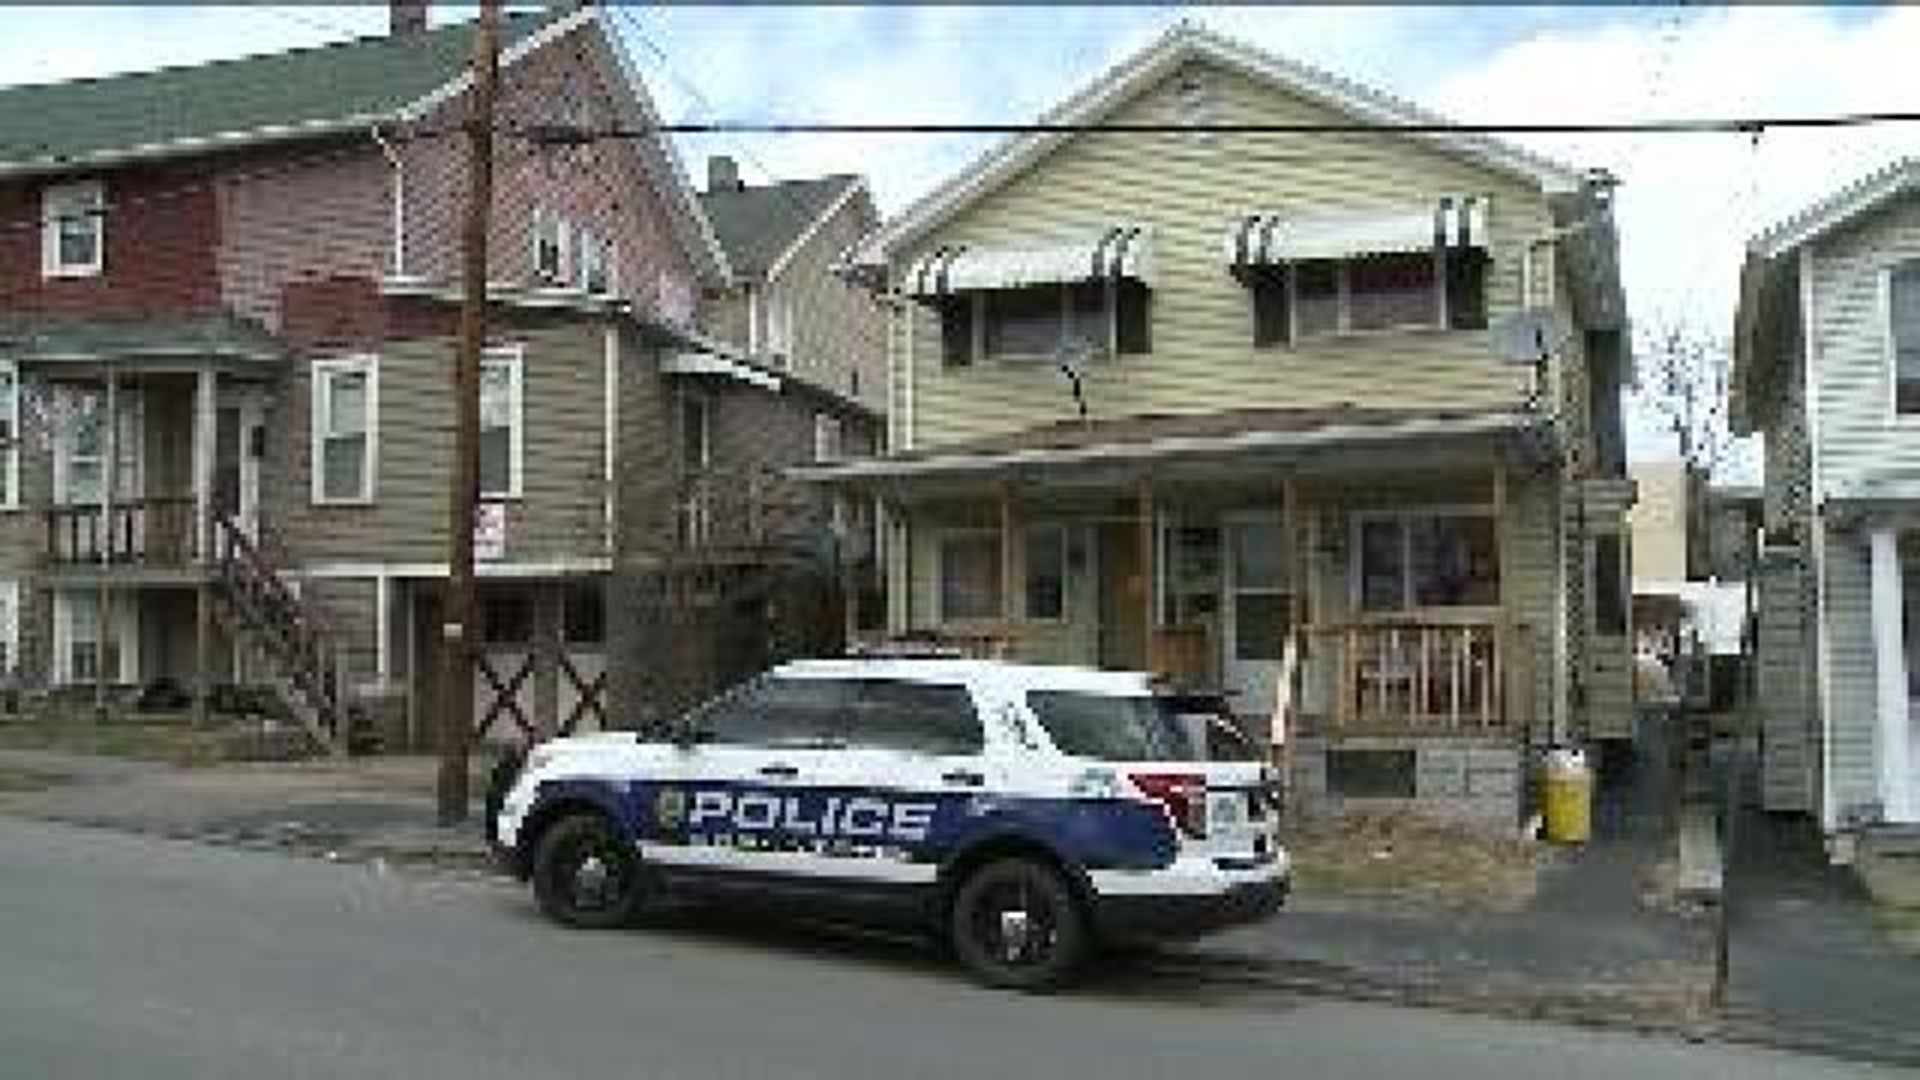 Police: Drugs Stored in Child's Room